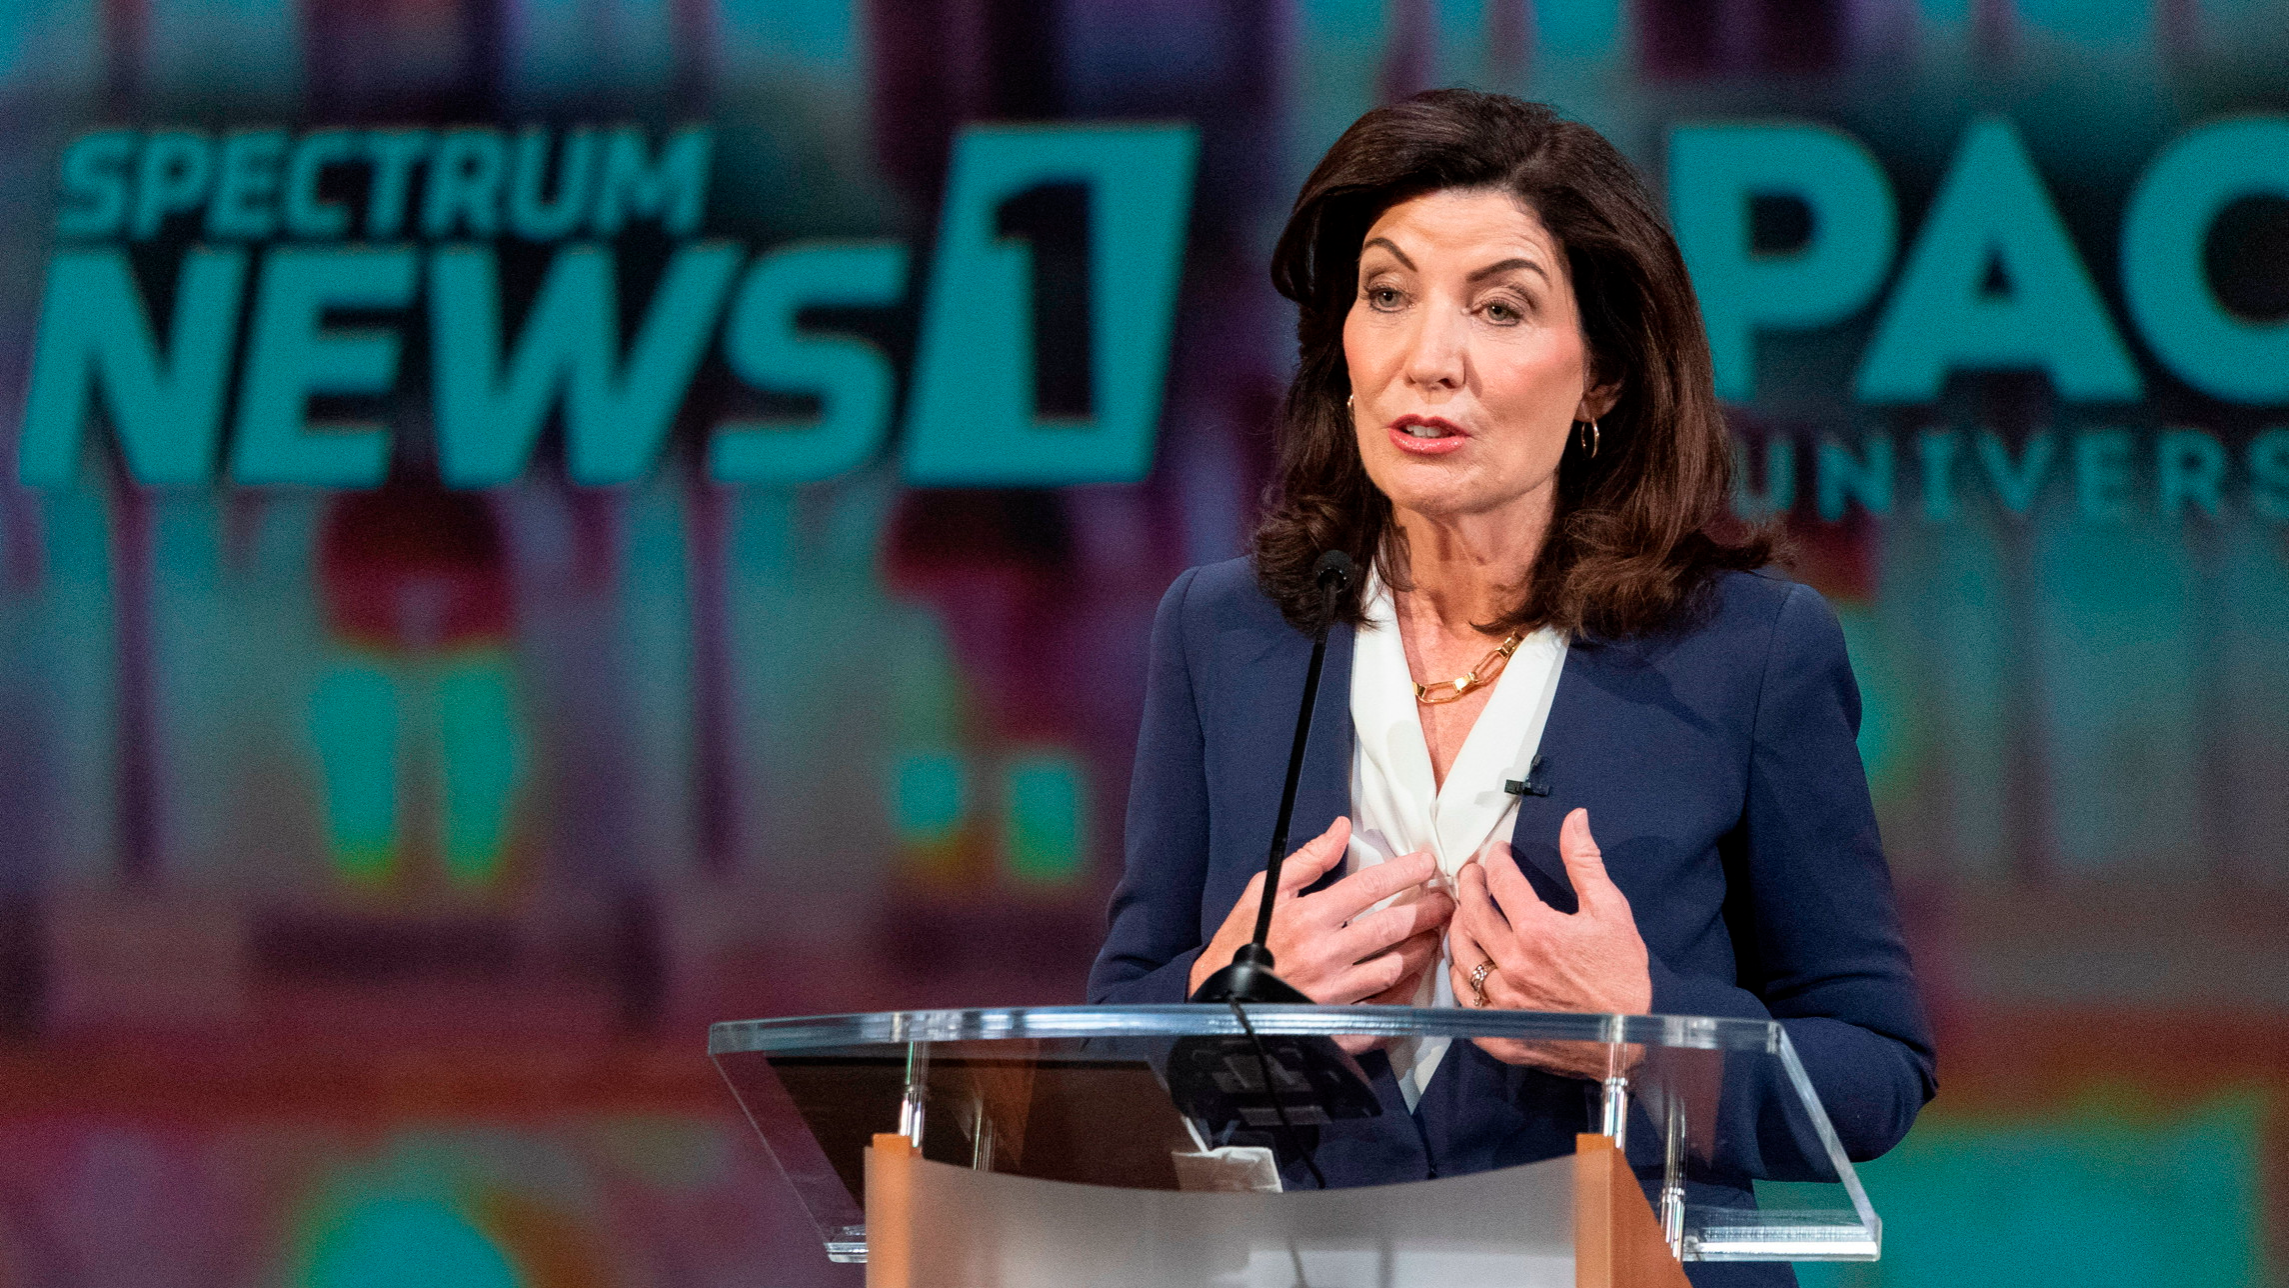 The issue is crime': Kathy Hochul in trouble in New York governor's race |  Financial Times